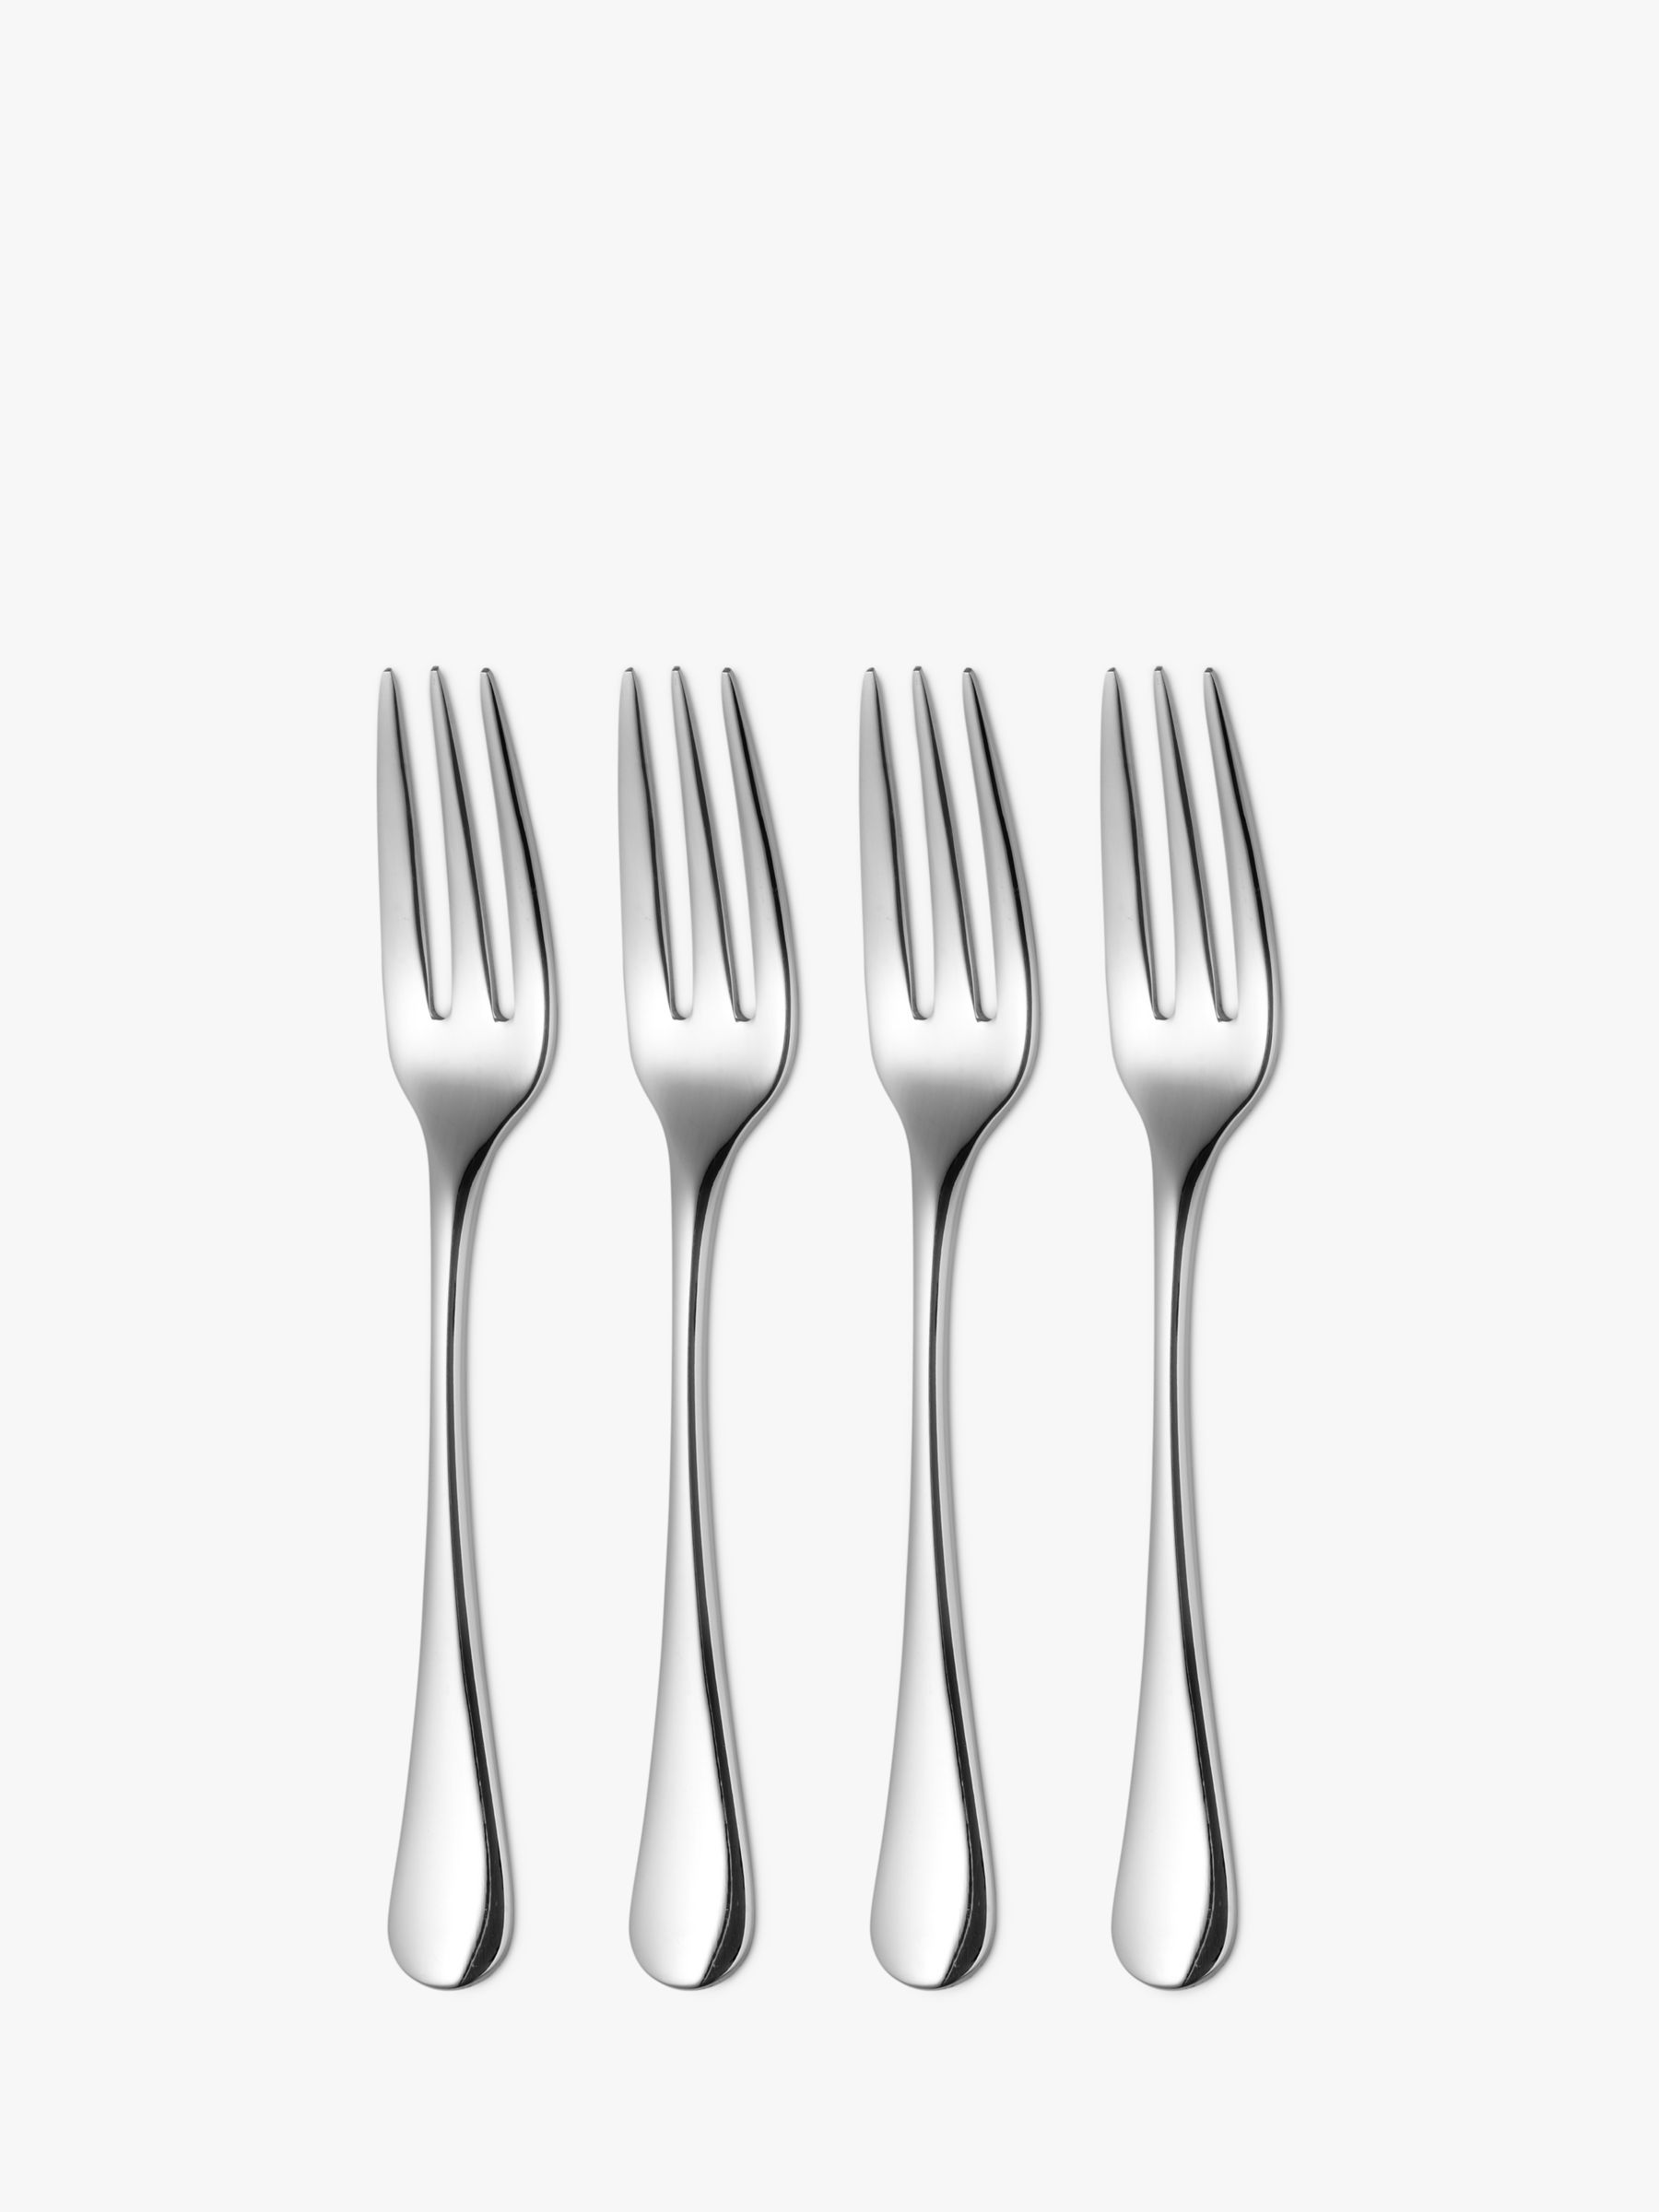 Radford Pastry Forks, Stainless Steel, 4-Piece